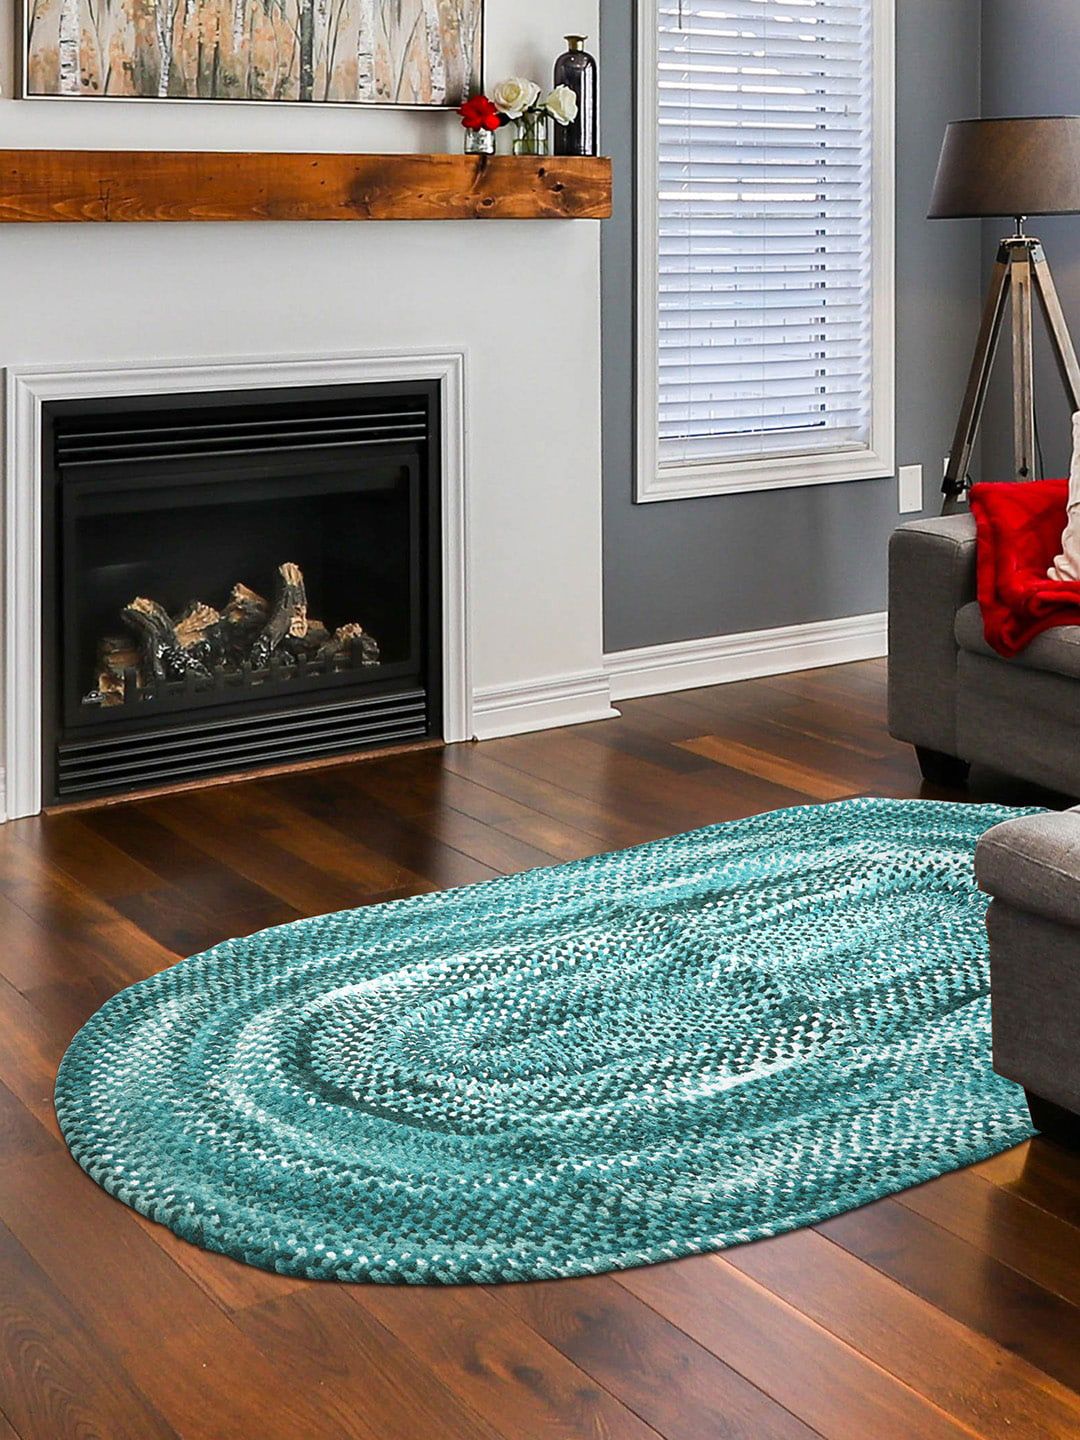 Pano Blue Braided Floor Mats Price in India